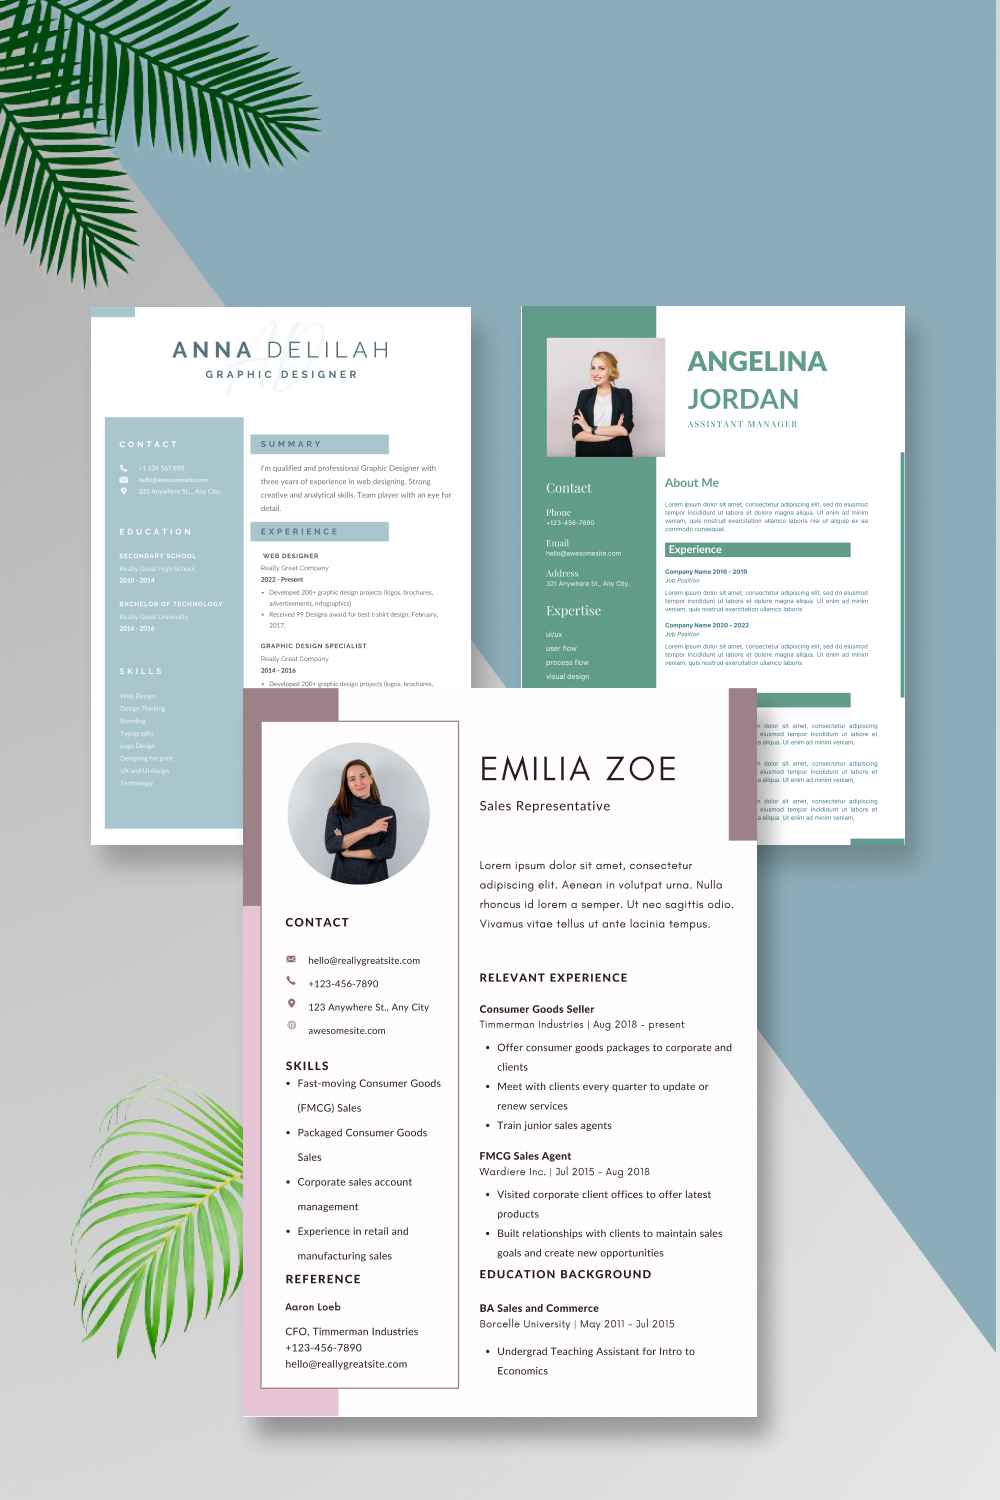 Professional resume template with a green and pink color scheme.